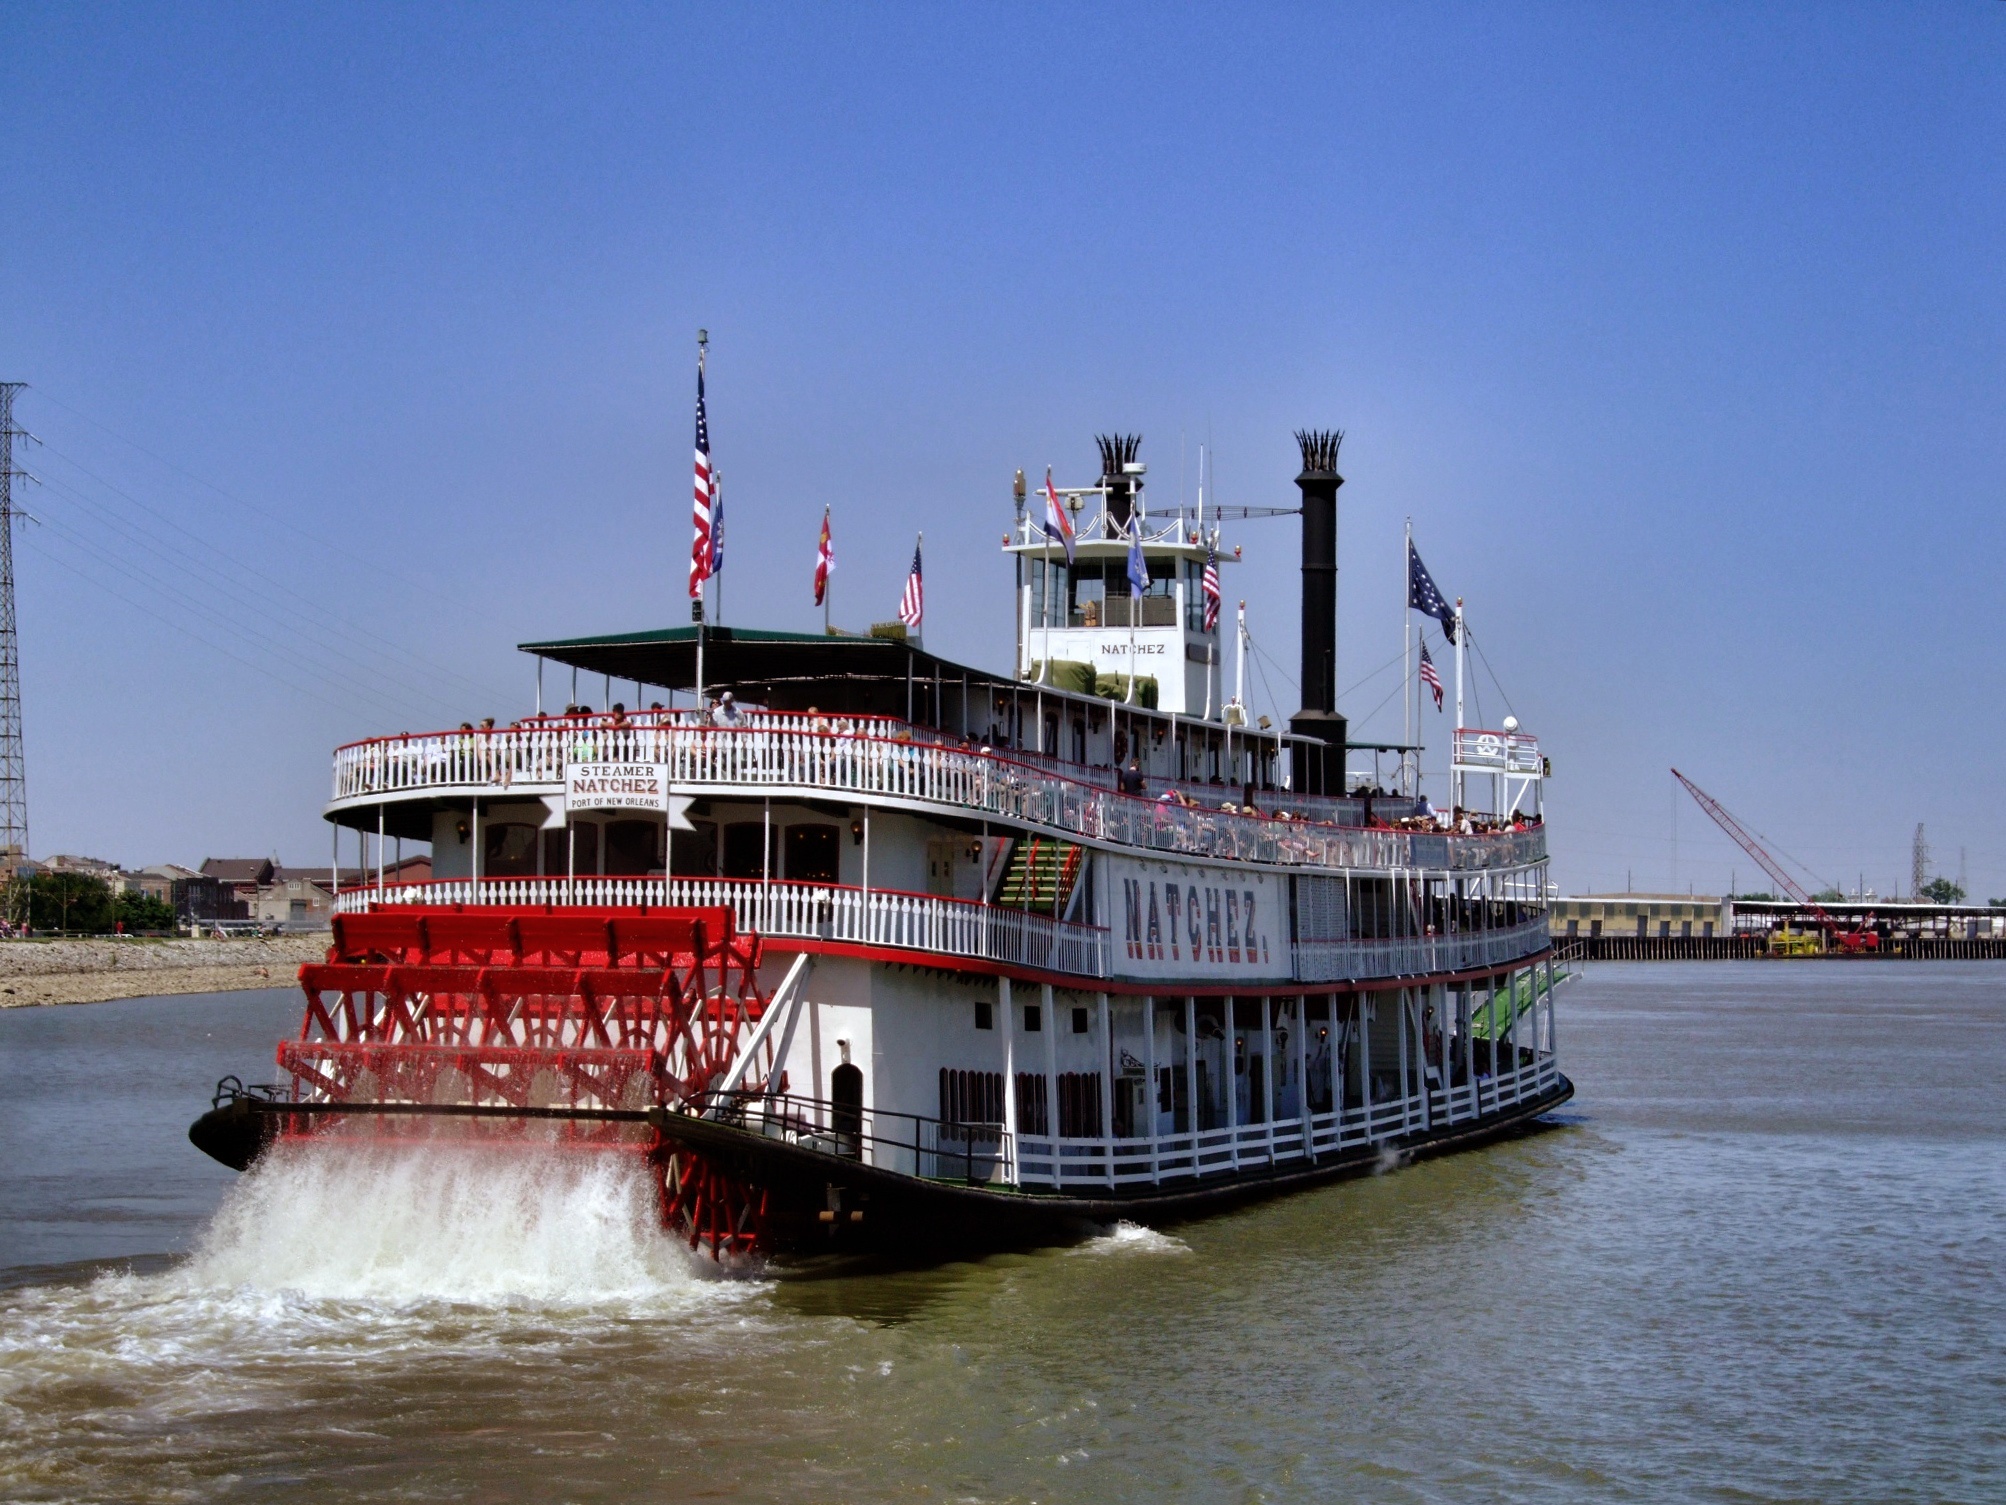 Natchez Riverboat | New Orleans Easy Travel Guide